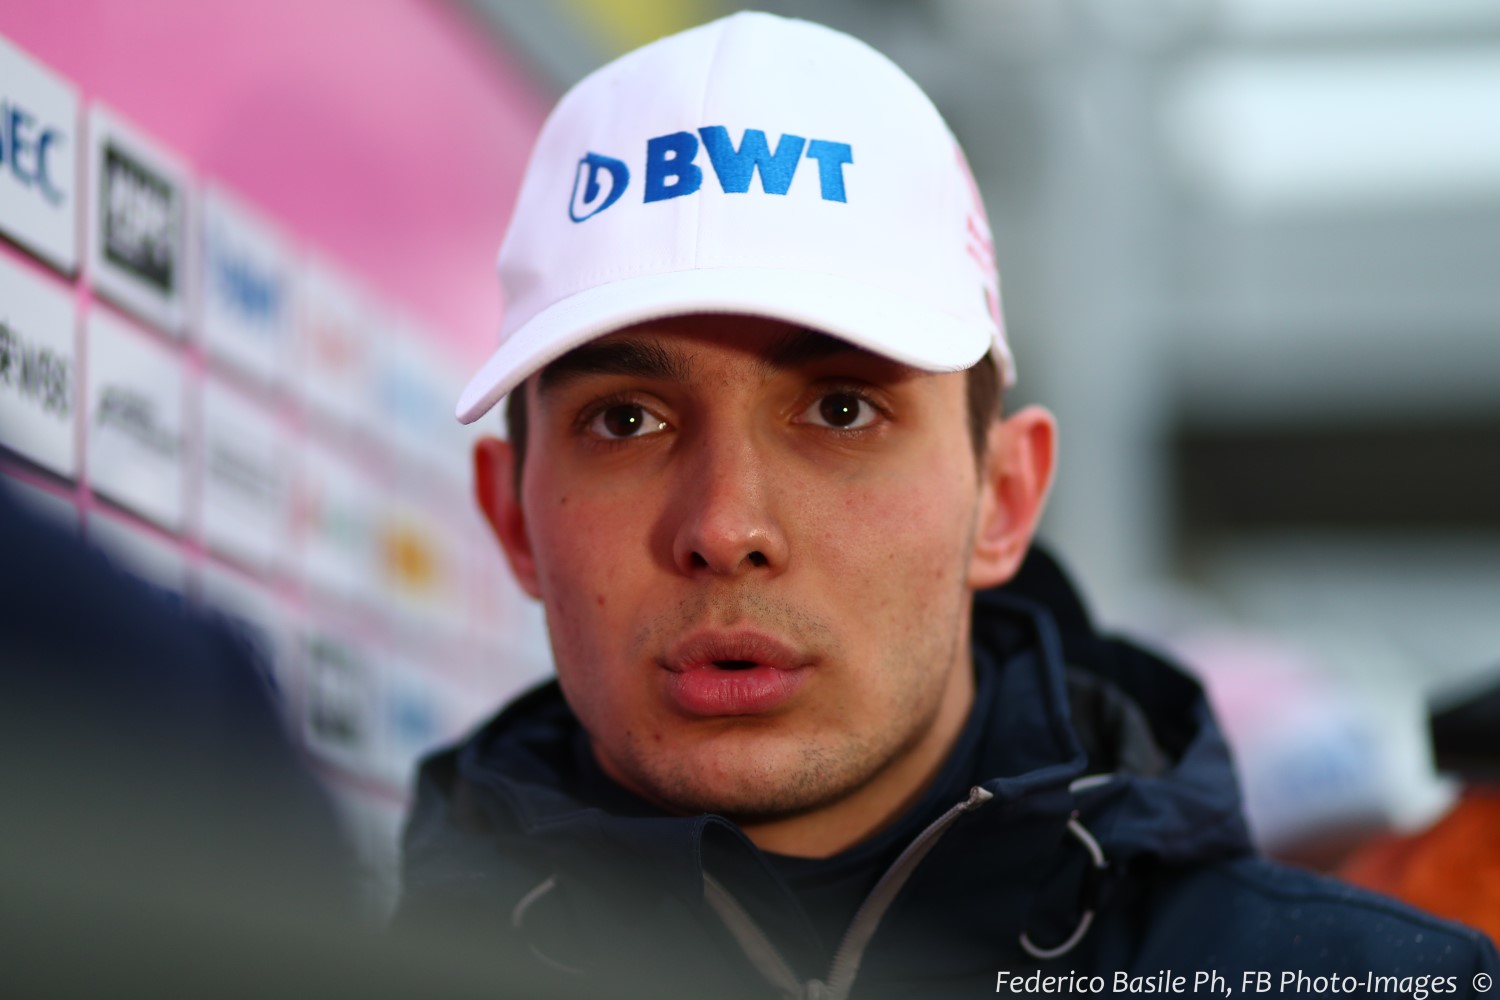 Esteban Ocon does not have a big check to buy an F1 ride